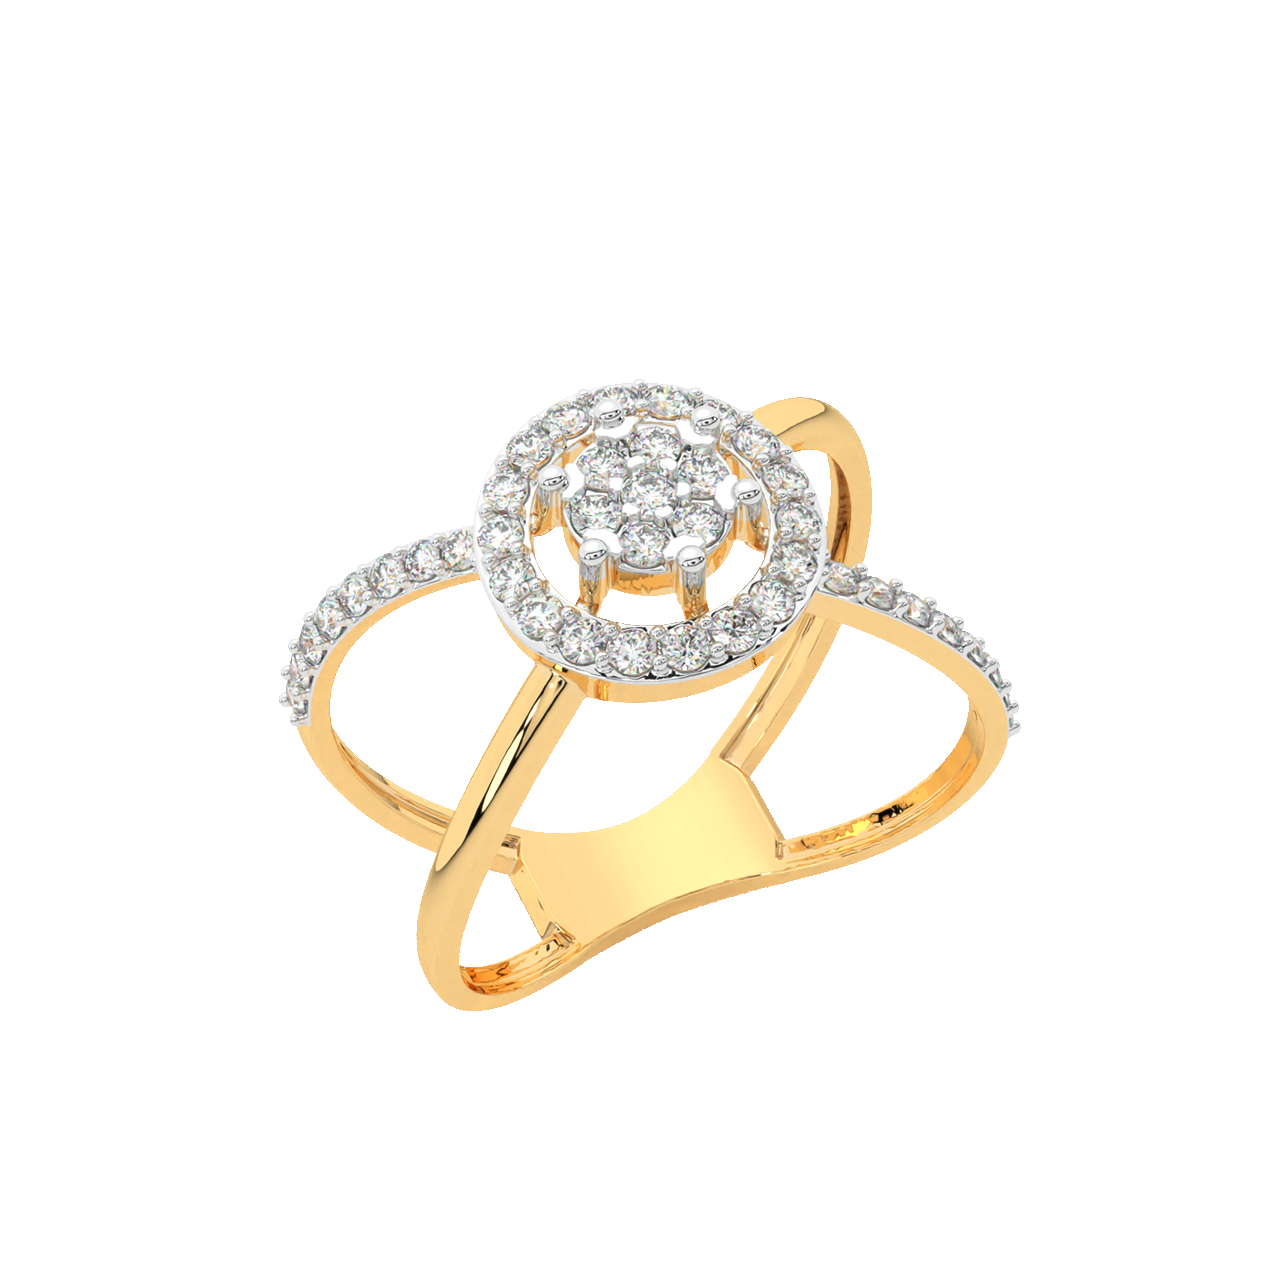 Buy Round Gold and Diamond Ring Online | ORRA